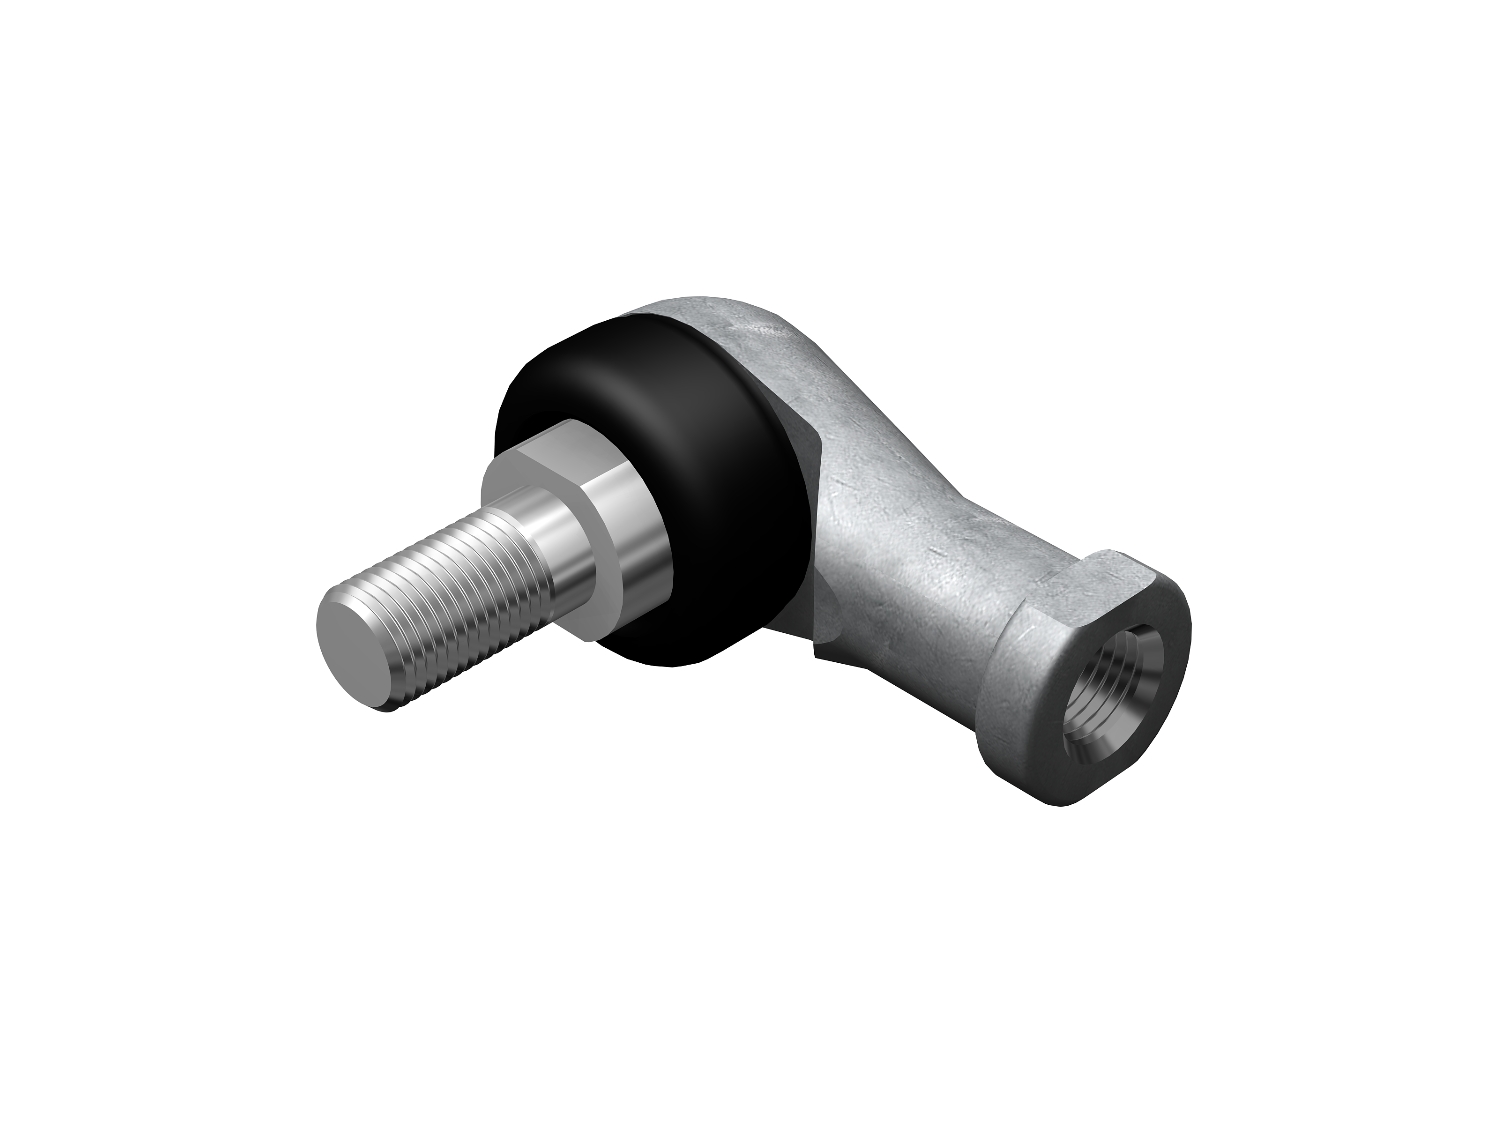 Rod End Bearing - Link Ball, Male Threaded Holder, BL Series